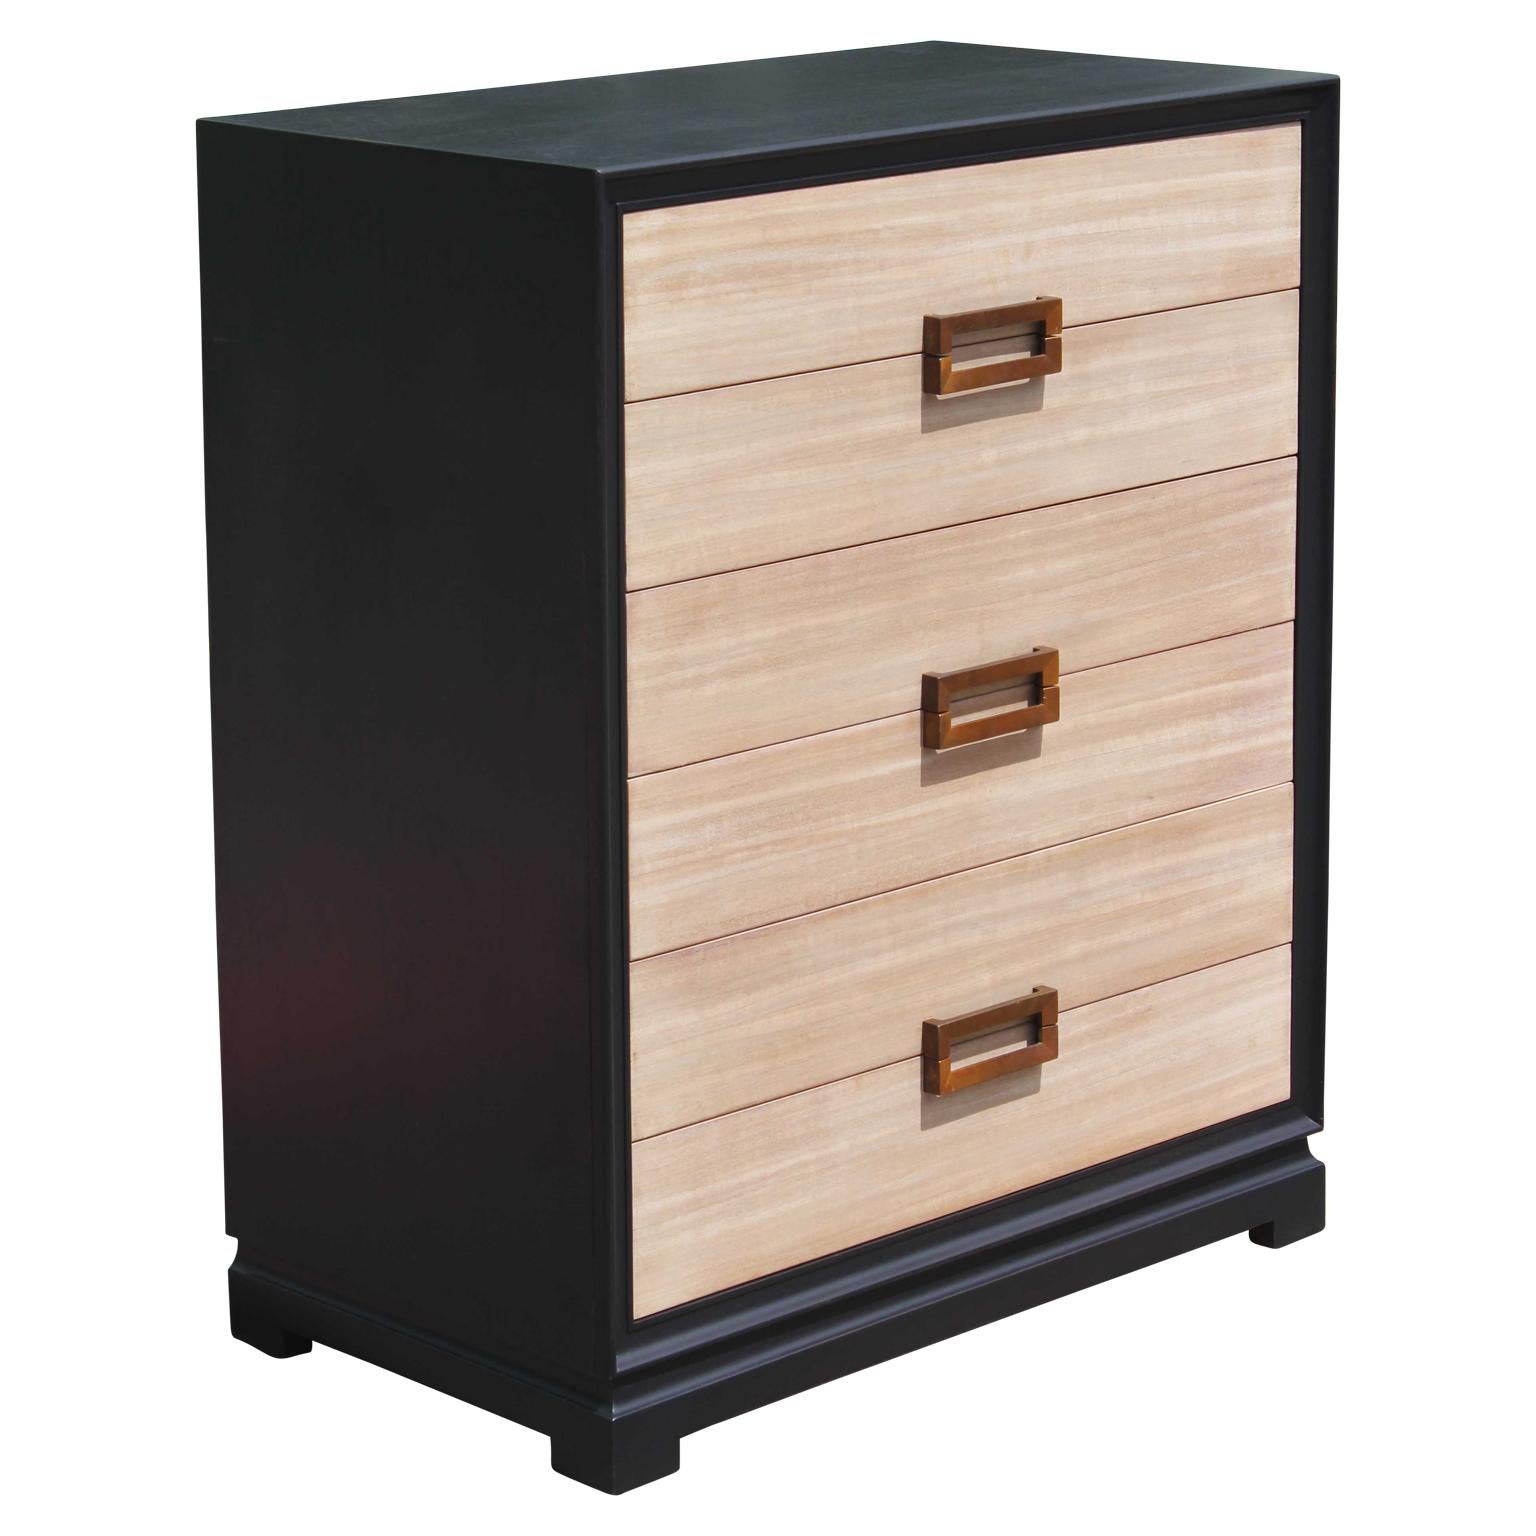 Mid-20th Century Modern Two-Tone Six-Drawer Chest of Drawers with a Neutral Finish & Brass Pulls